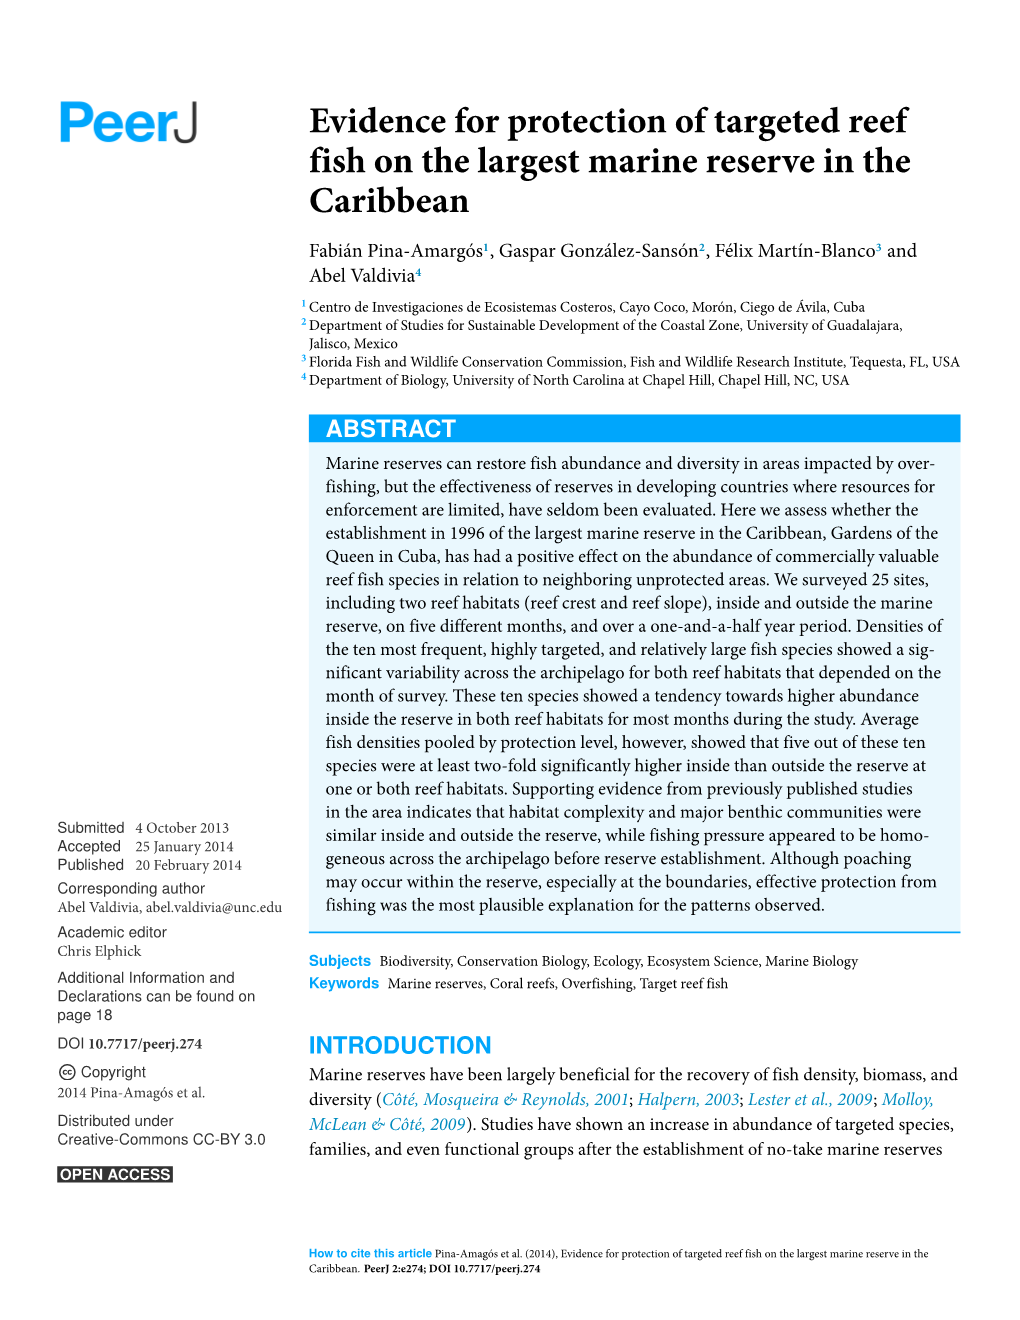 Evidence for Protection of Targeted Reef Fish on the Largest Marine Reserve in the Caribbean